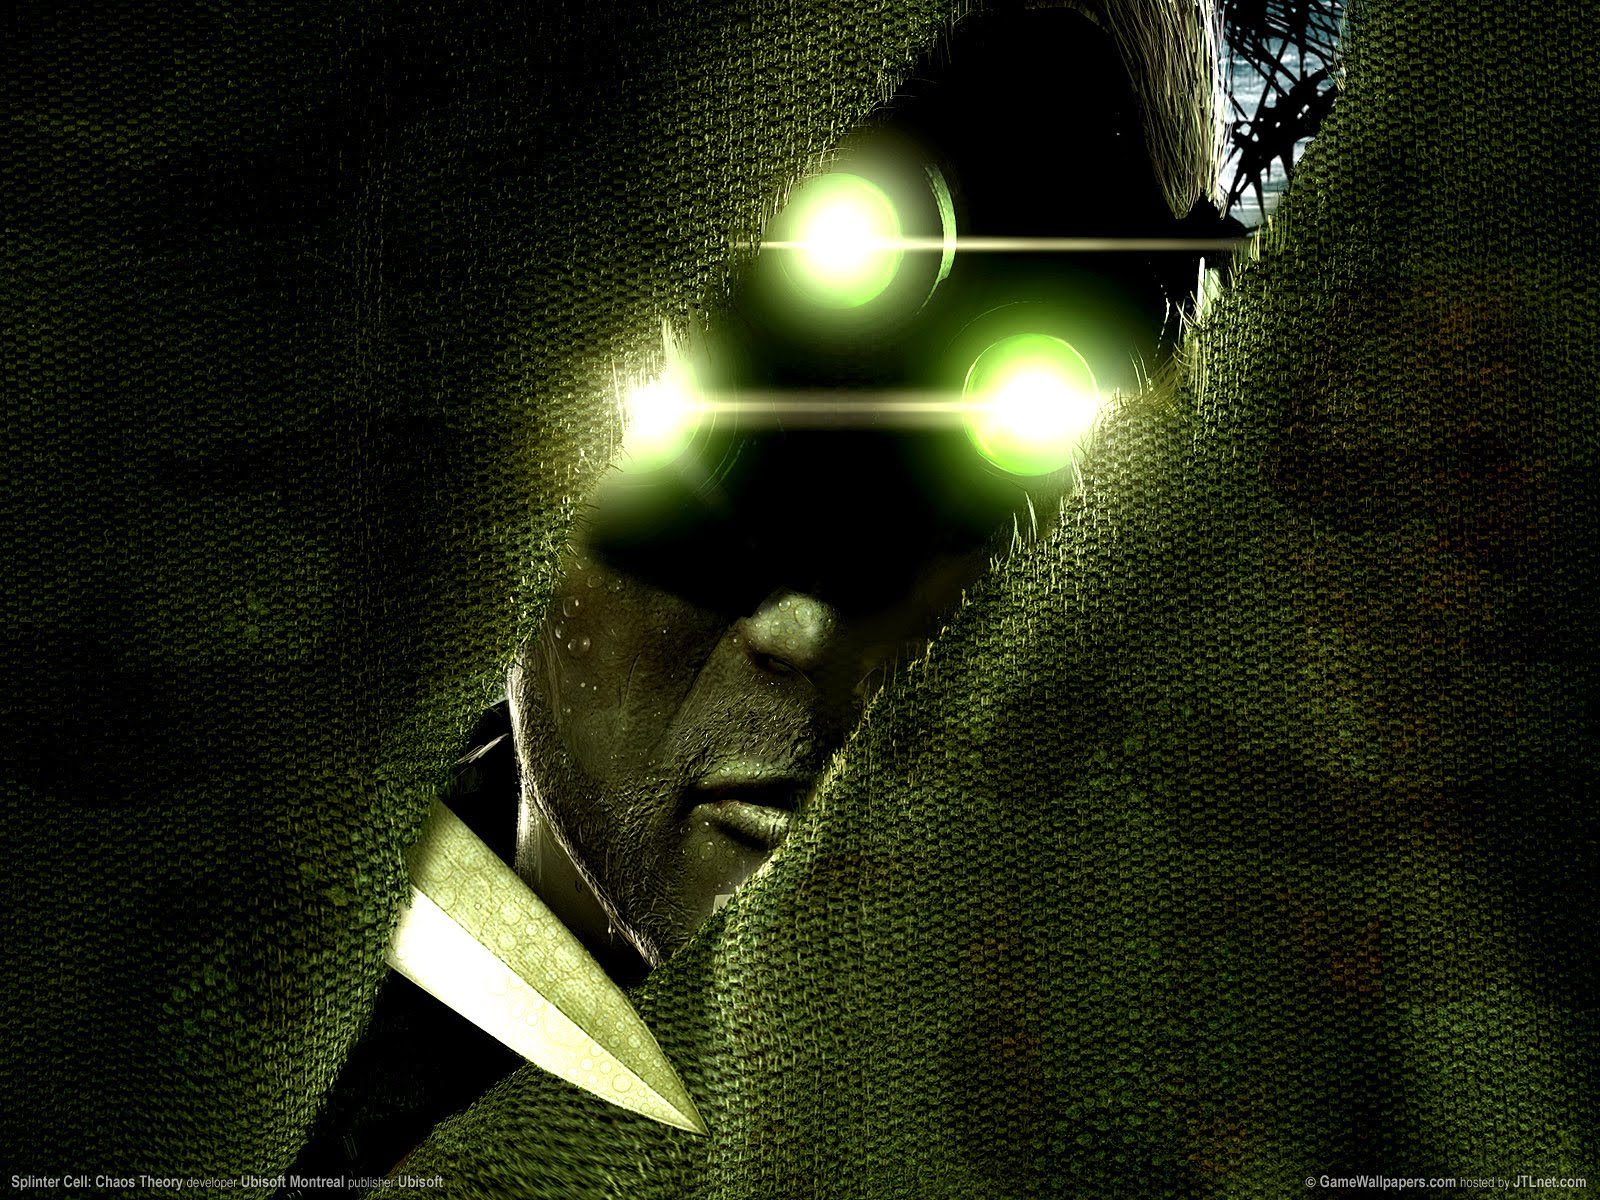 Splinter Cell 3: Chaos Theory intro/training videos - YouTube